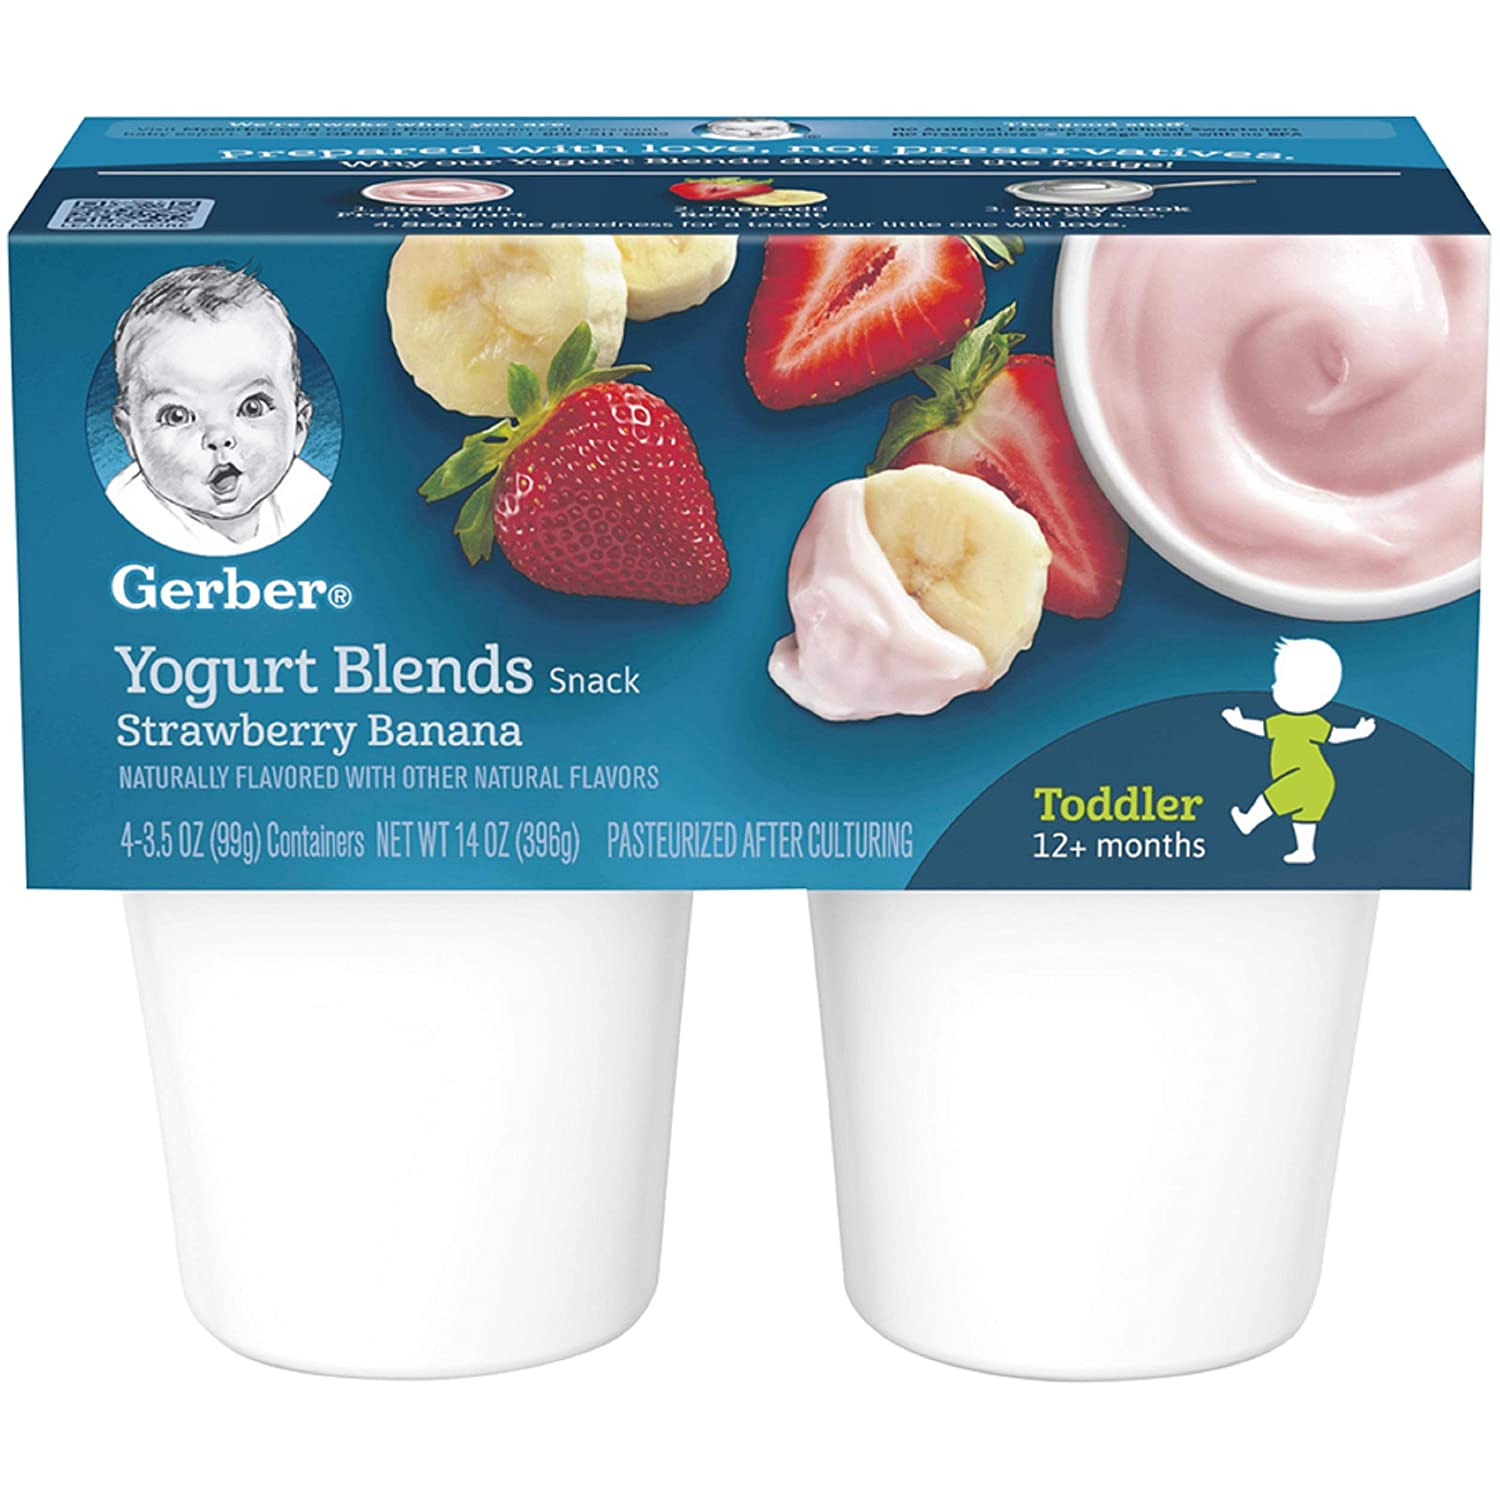 GERBER Yogurt blends - Strawberry banana, naturally flavored baby snack - 396g ,pack of 4 - 12 + months